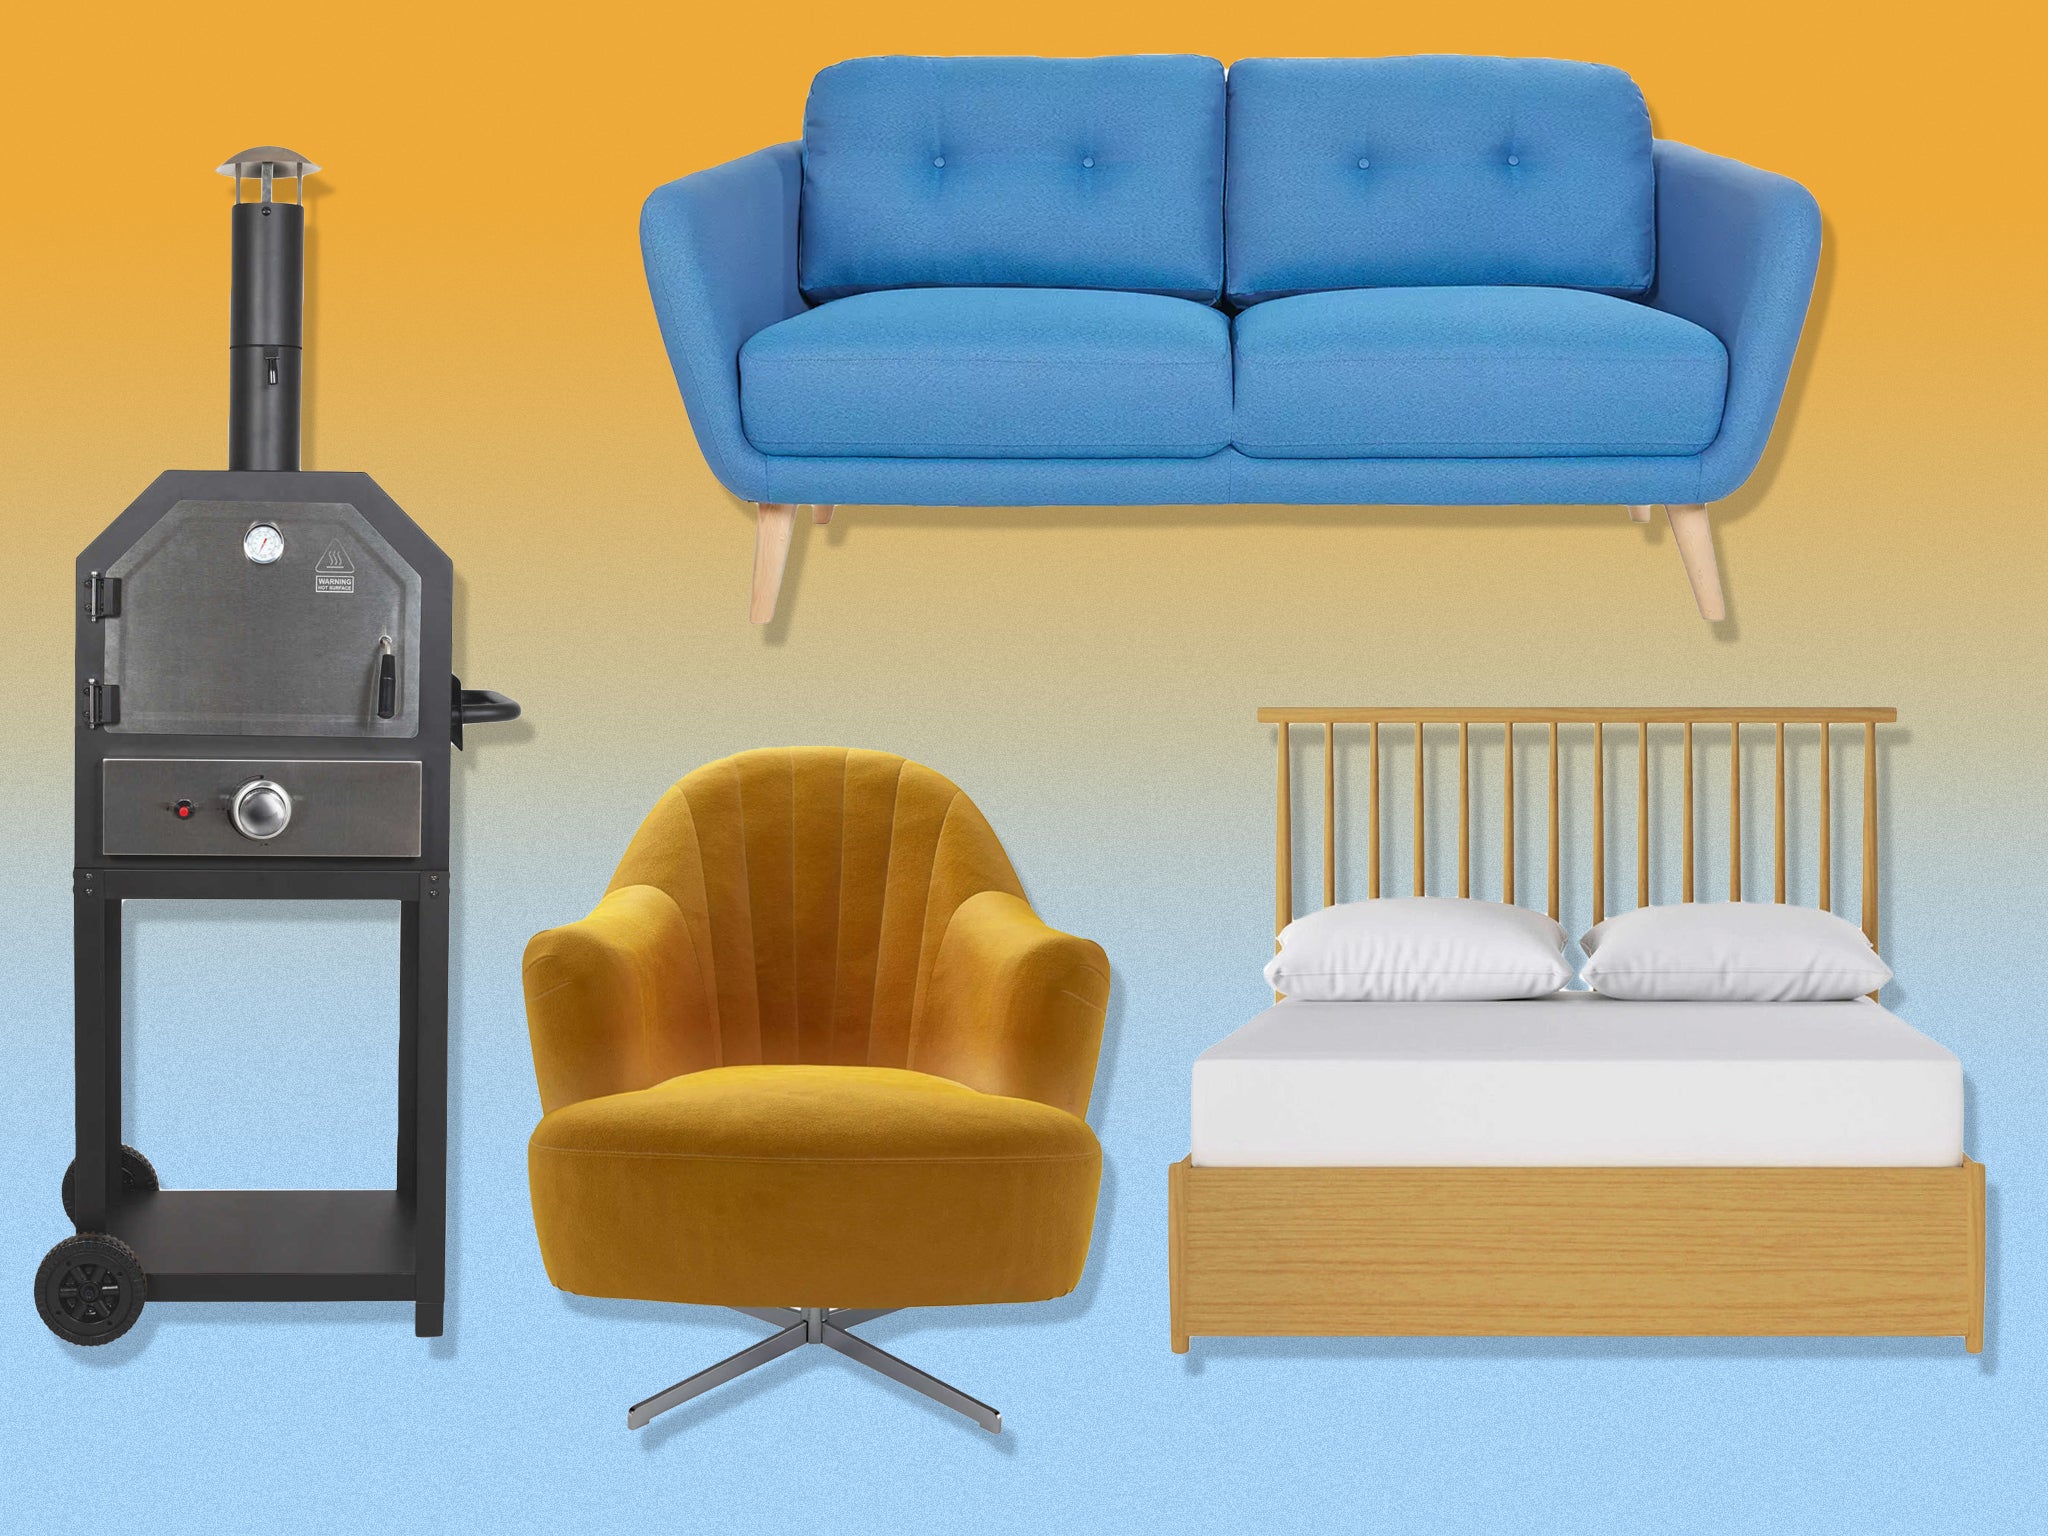 If your home’s in need of a spring refresh, now may be the best time to buy